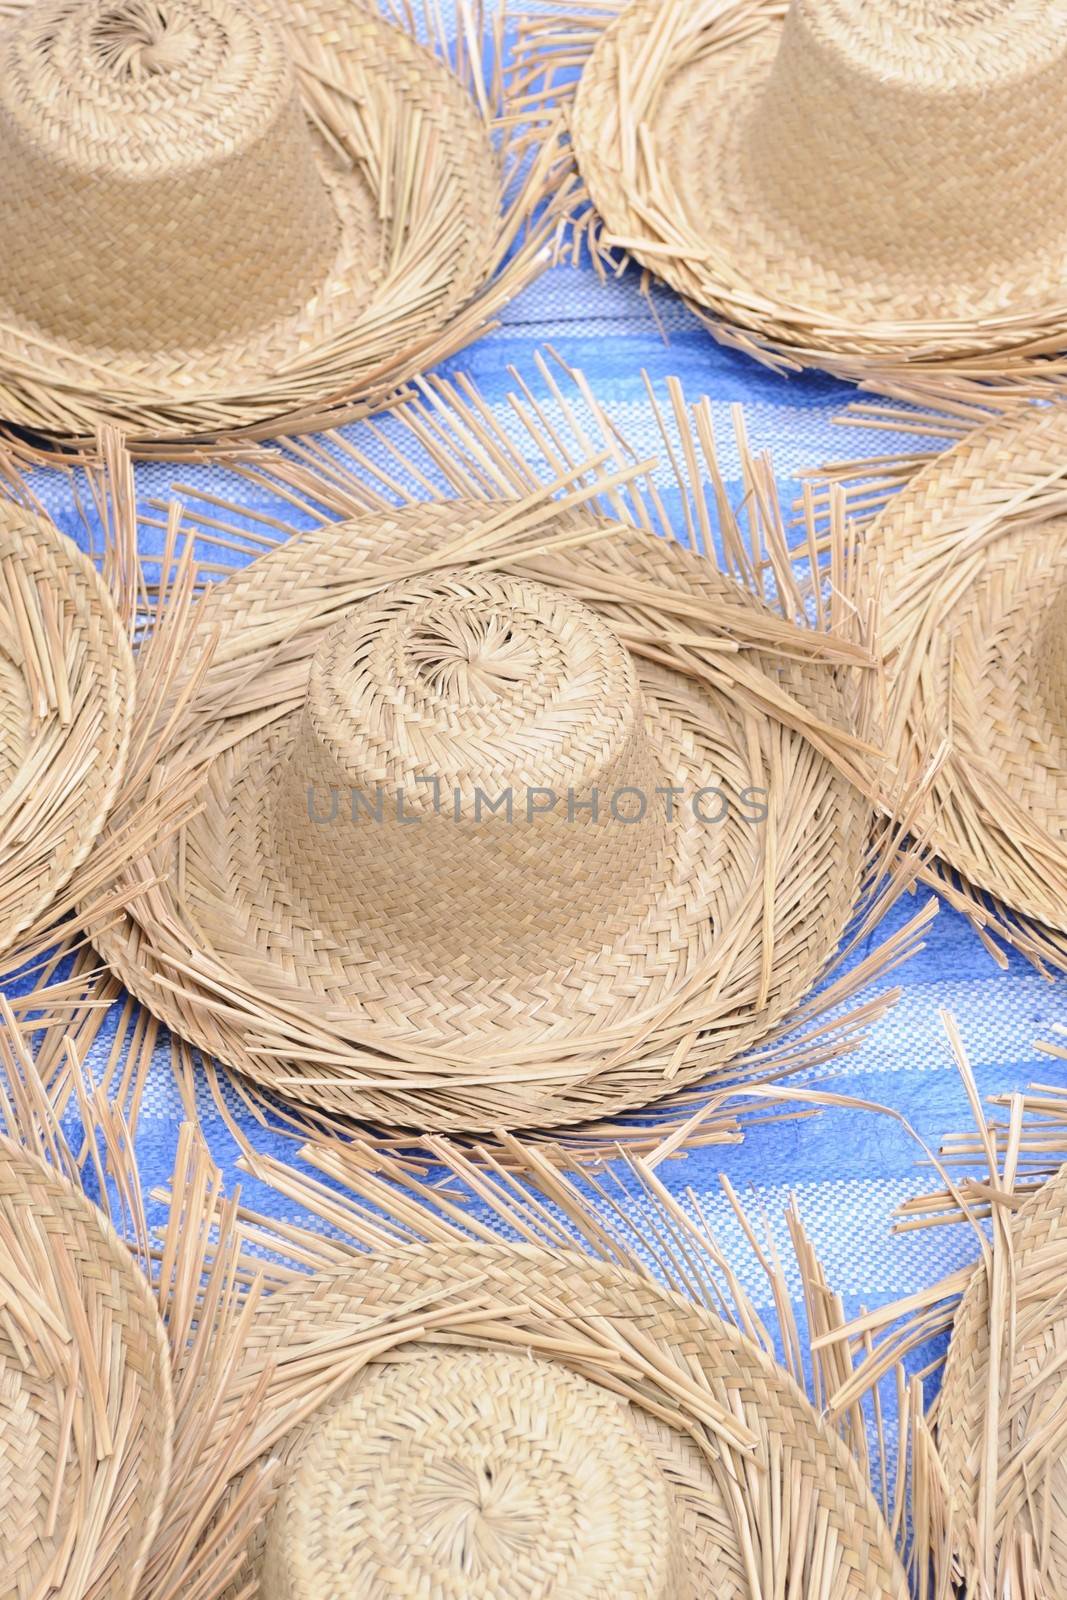 Straw hat in local market. by ngungfoto